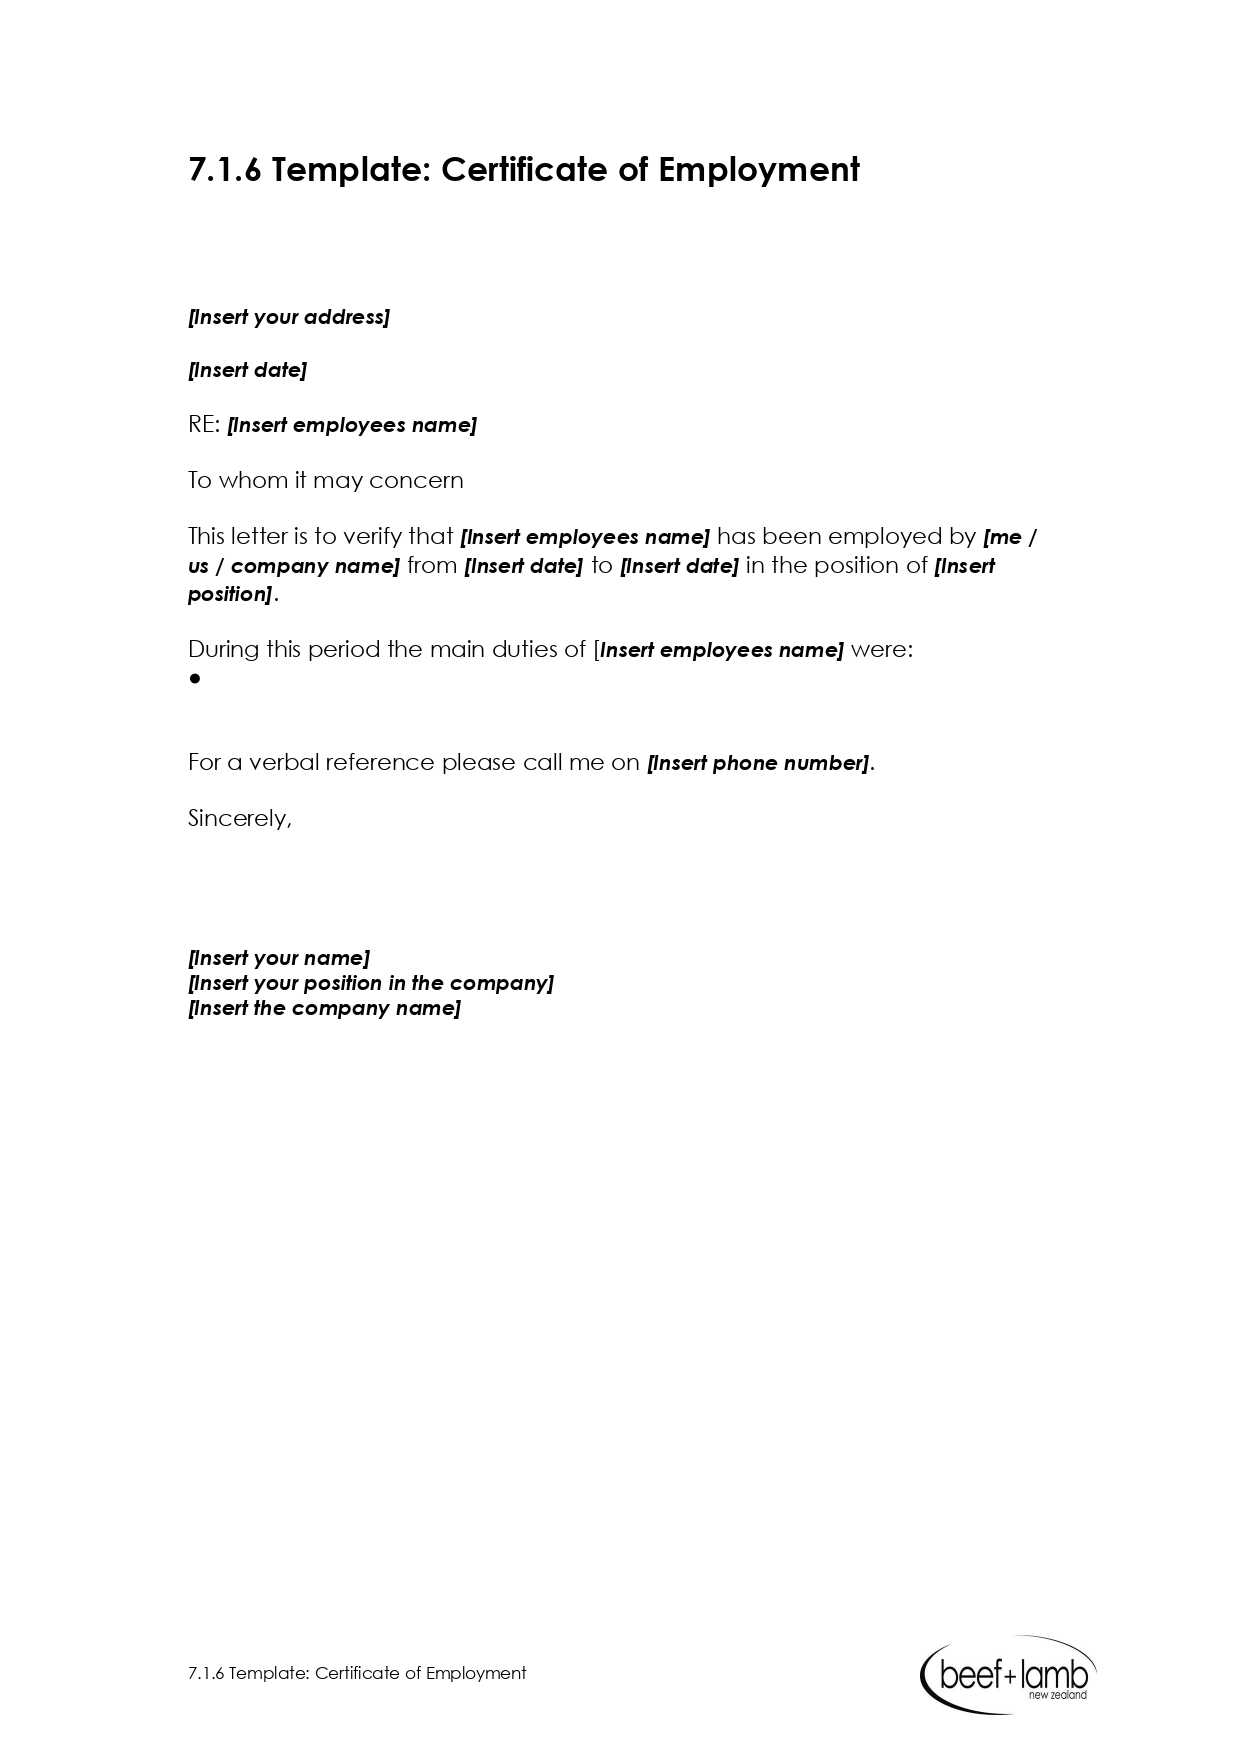 Editable Certificate Of Employment Template - Google Docs With Certificate Of Employment Template